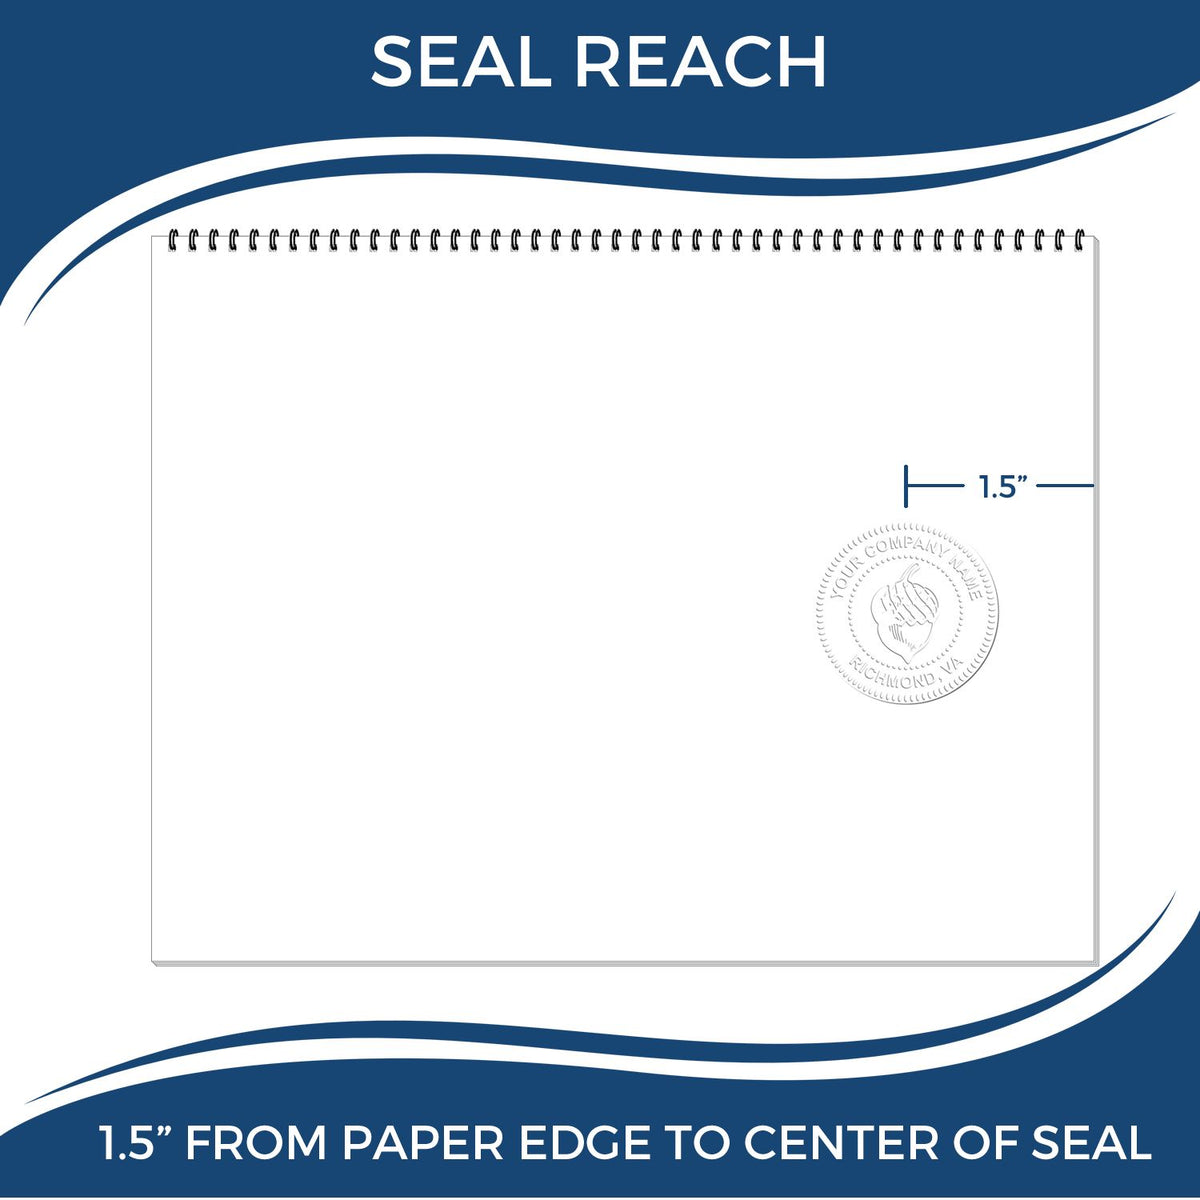 An infographic showing the seal reach which is represented by a ruler and a miniature seal image of the Soft California Professional Engineer Seal